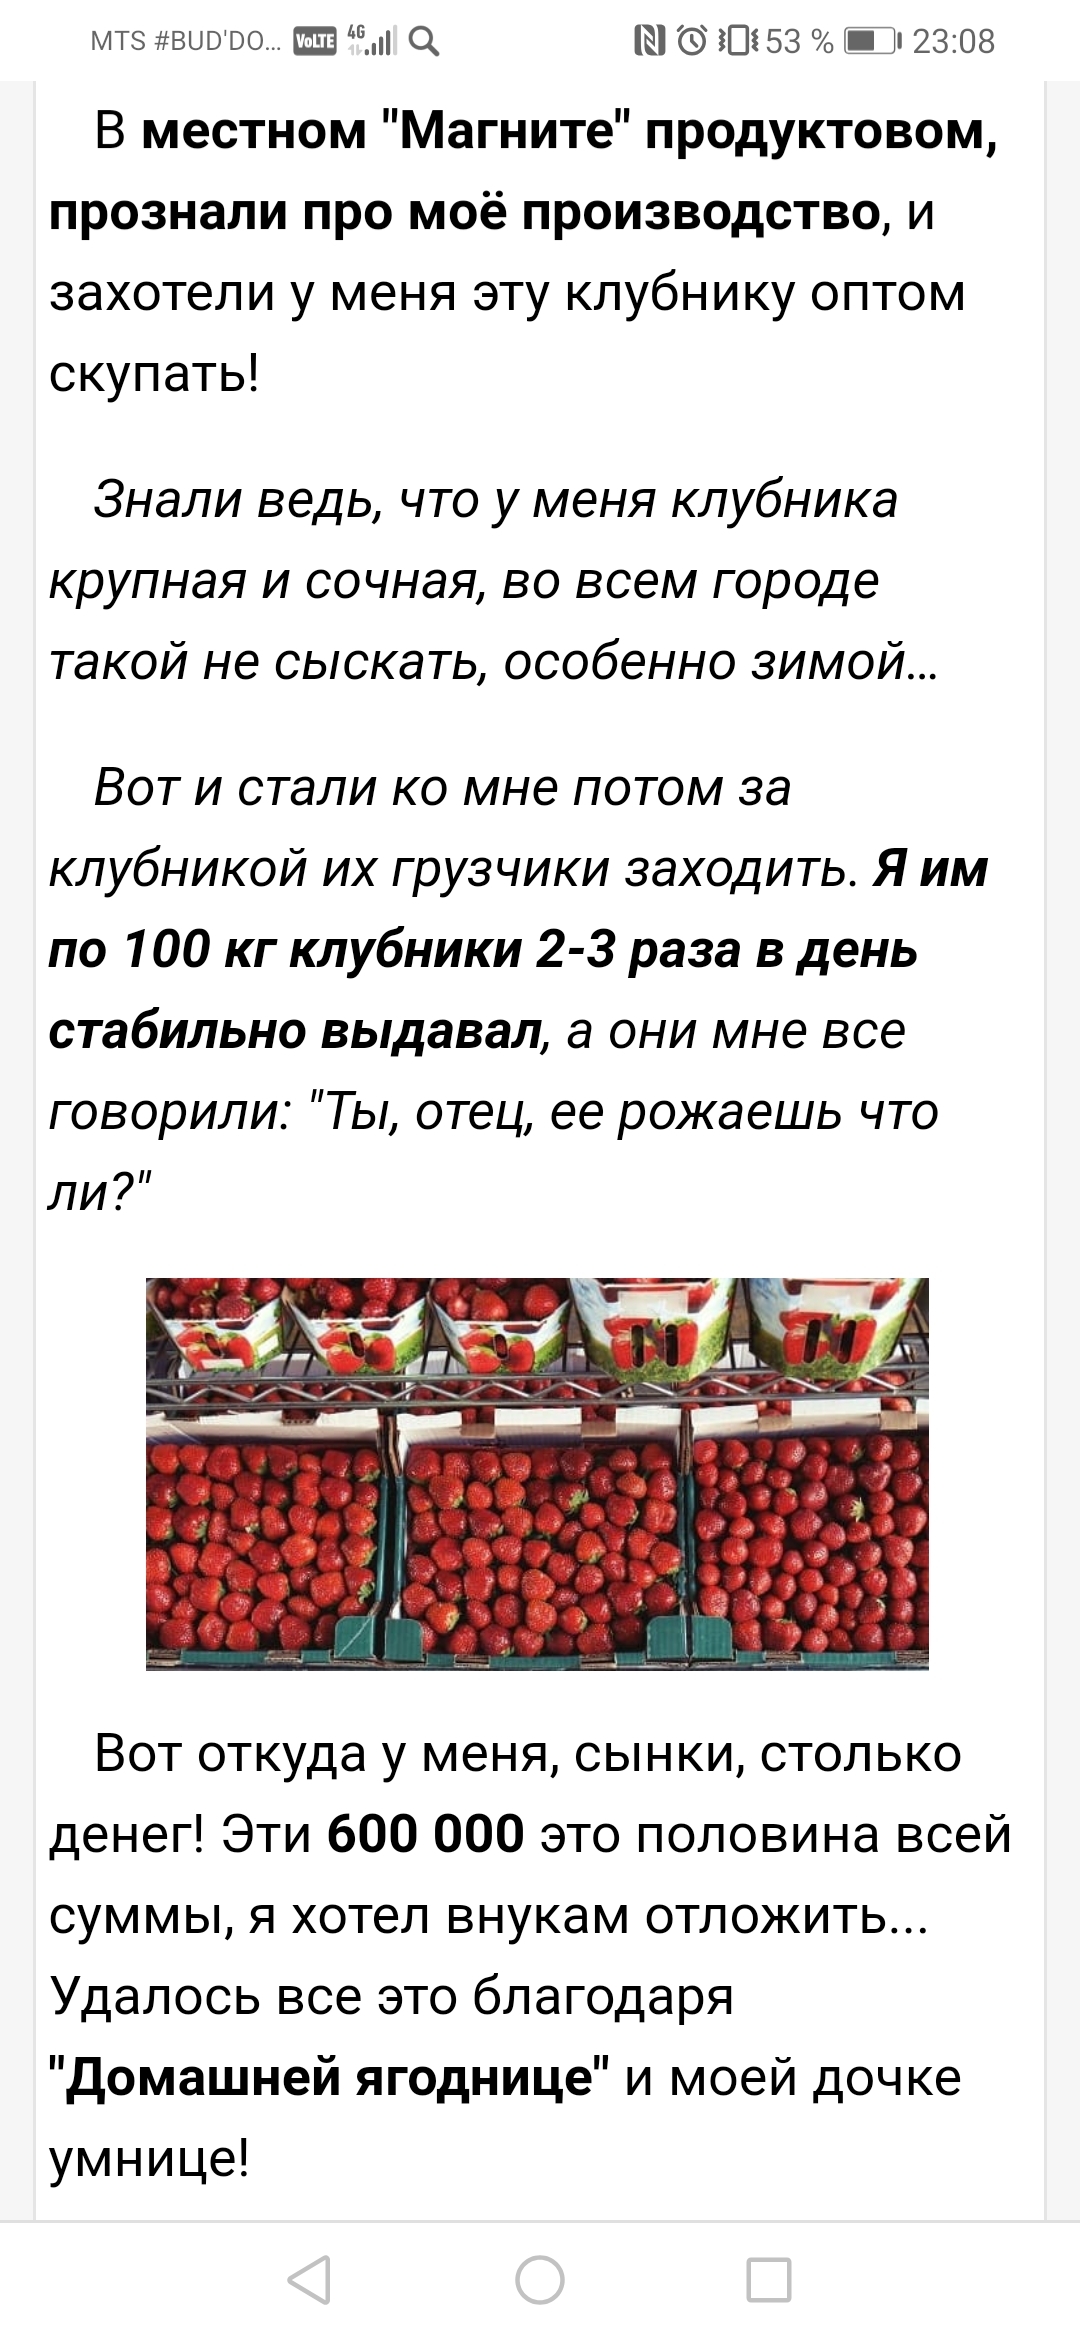 You can grow 10 kg of strawberries per day in your kitchen! Divorce!!! - Divorce for money, Advertising, Longpost, Screenshot, Negative